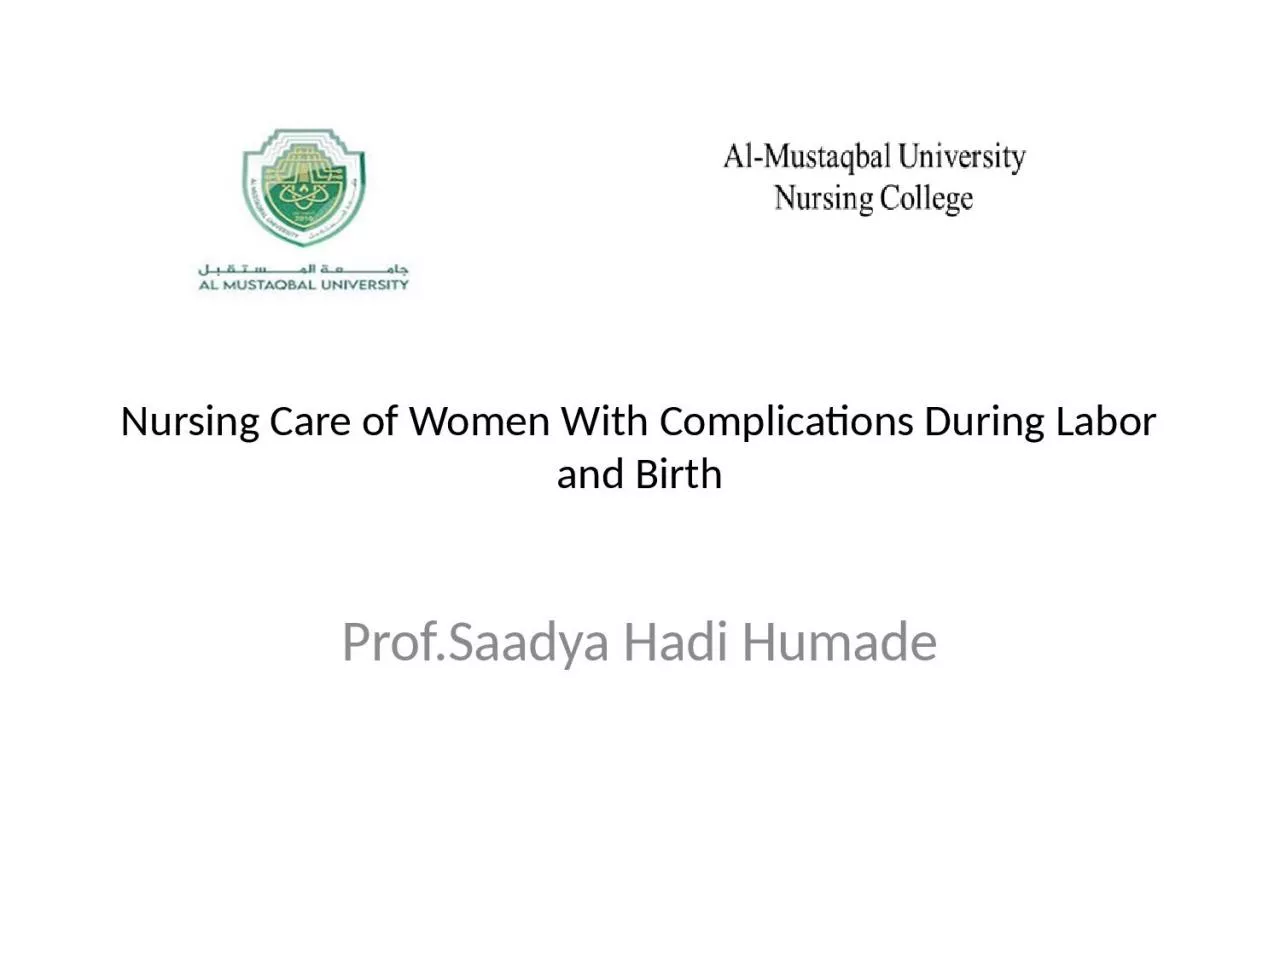 Nursing Care of Women With Complications During Labor and Birth